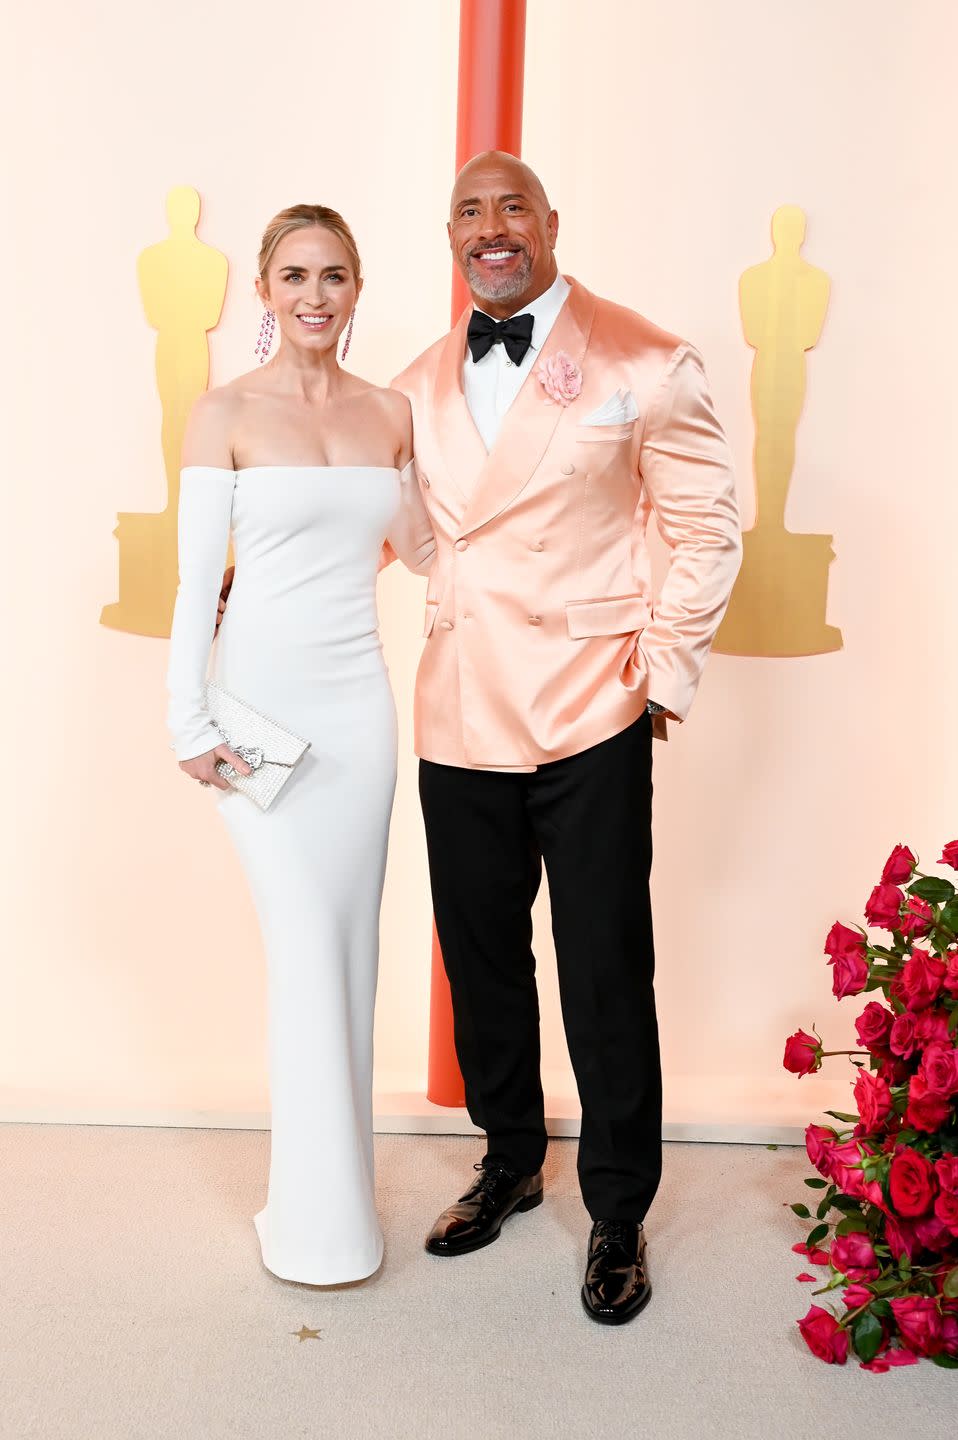 Emily Blunt in a long white strapless dress and Dwayne Johnson in a black bow tie, trousers and a peach satin tuxedo